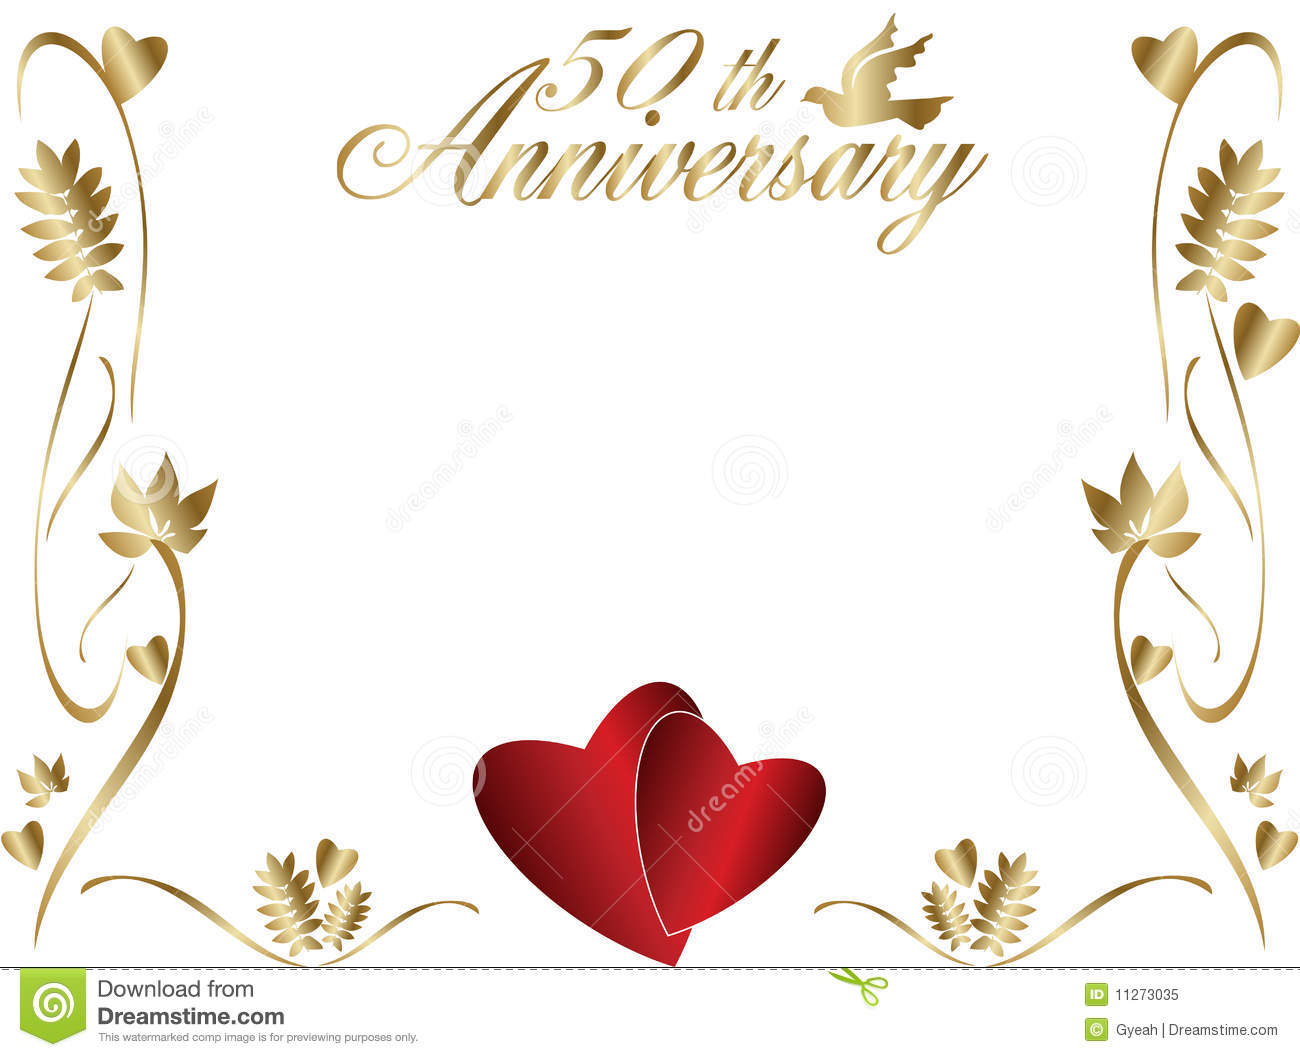 50th Wedding Anniversary Border With Copyspace Text And Beautiful